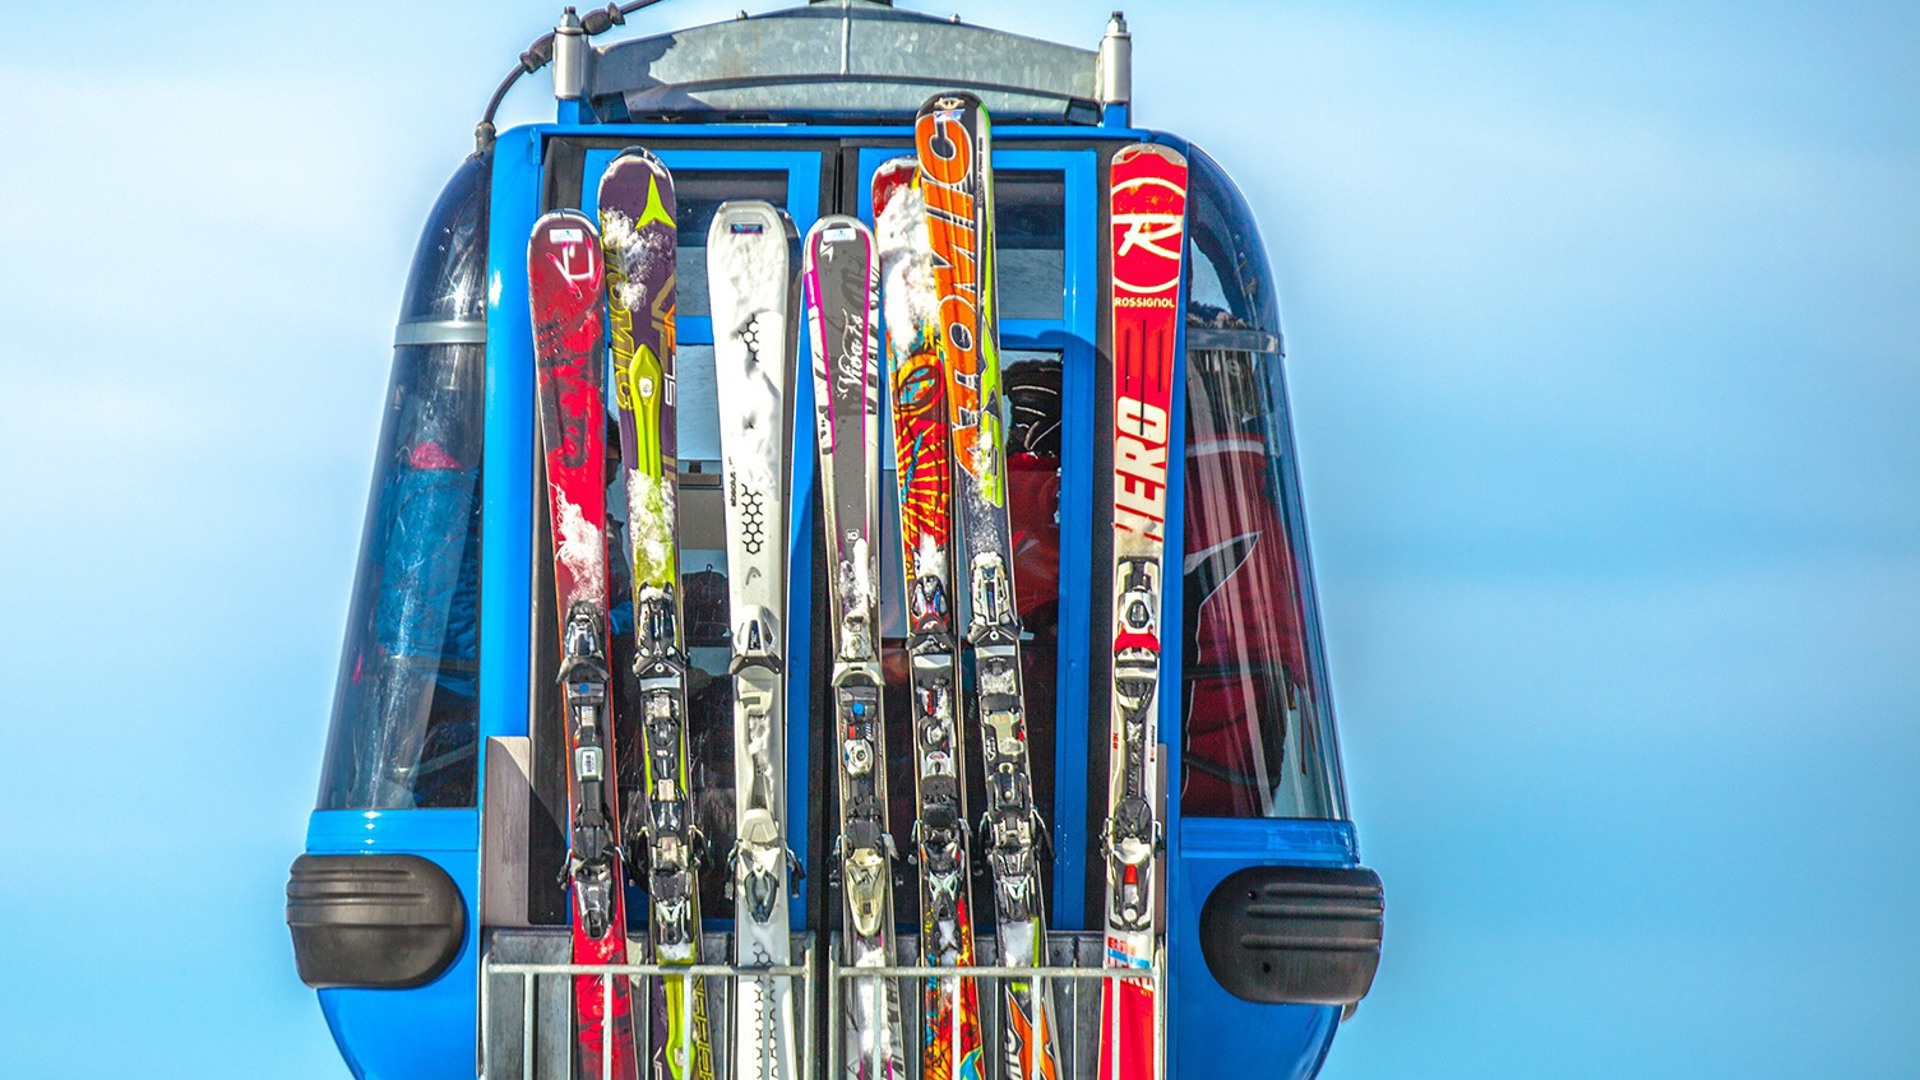 Tip: hire your winter sports gear next door to our resort!